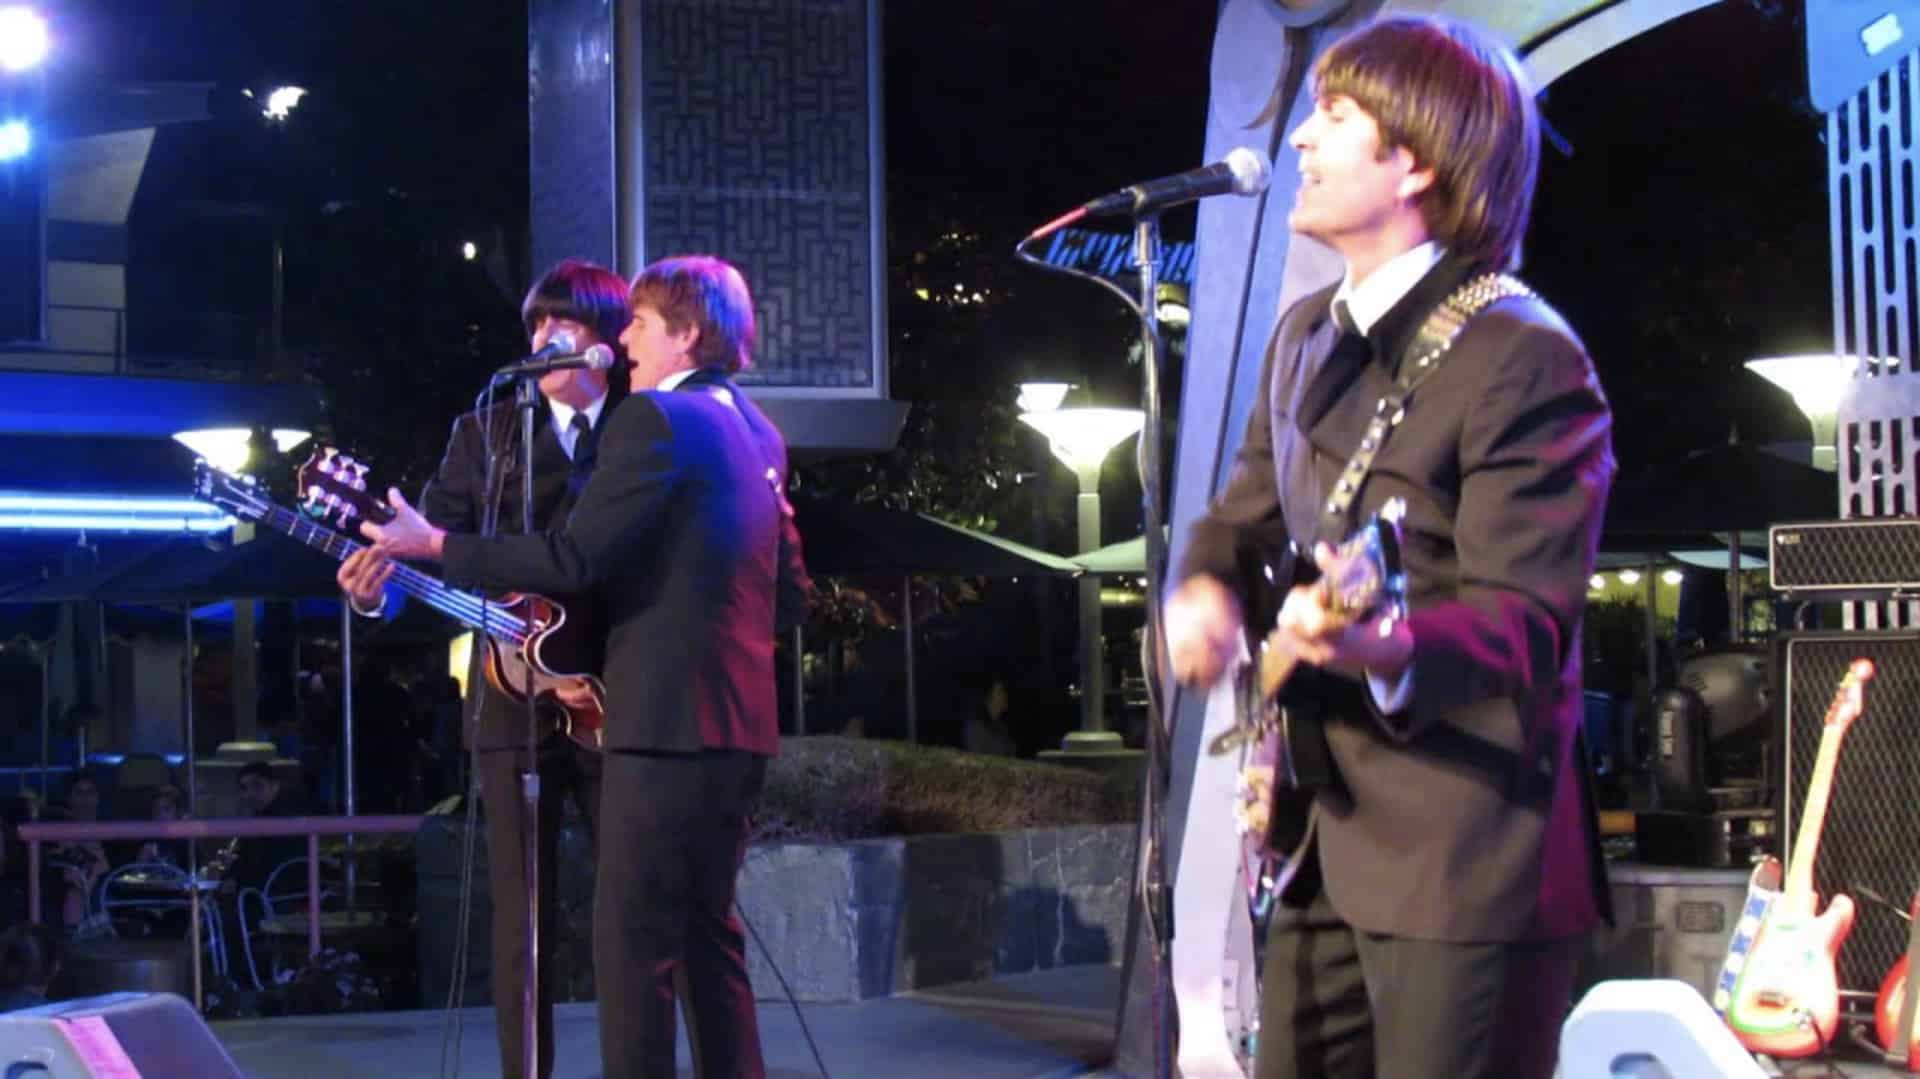 he Beatles tribute band Paperback Writer perform on stage